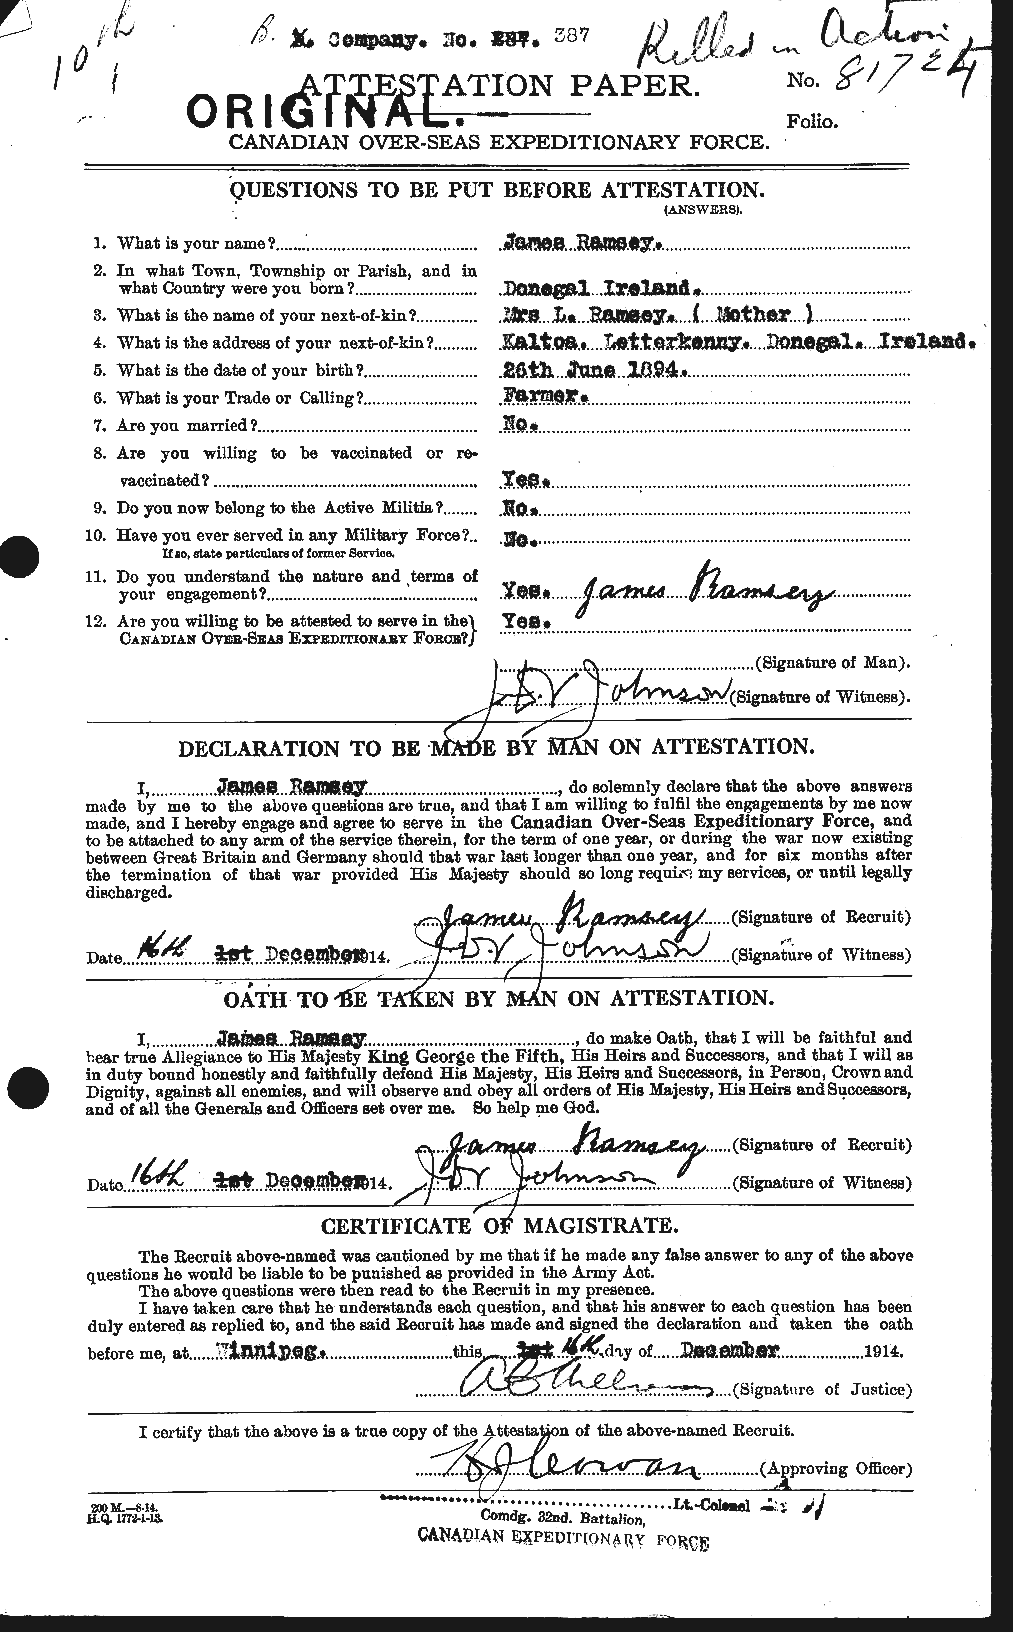 Personnel Records of the First World War - CEF 593857a